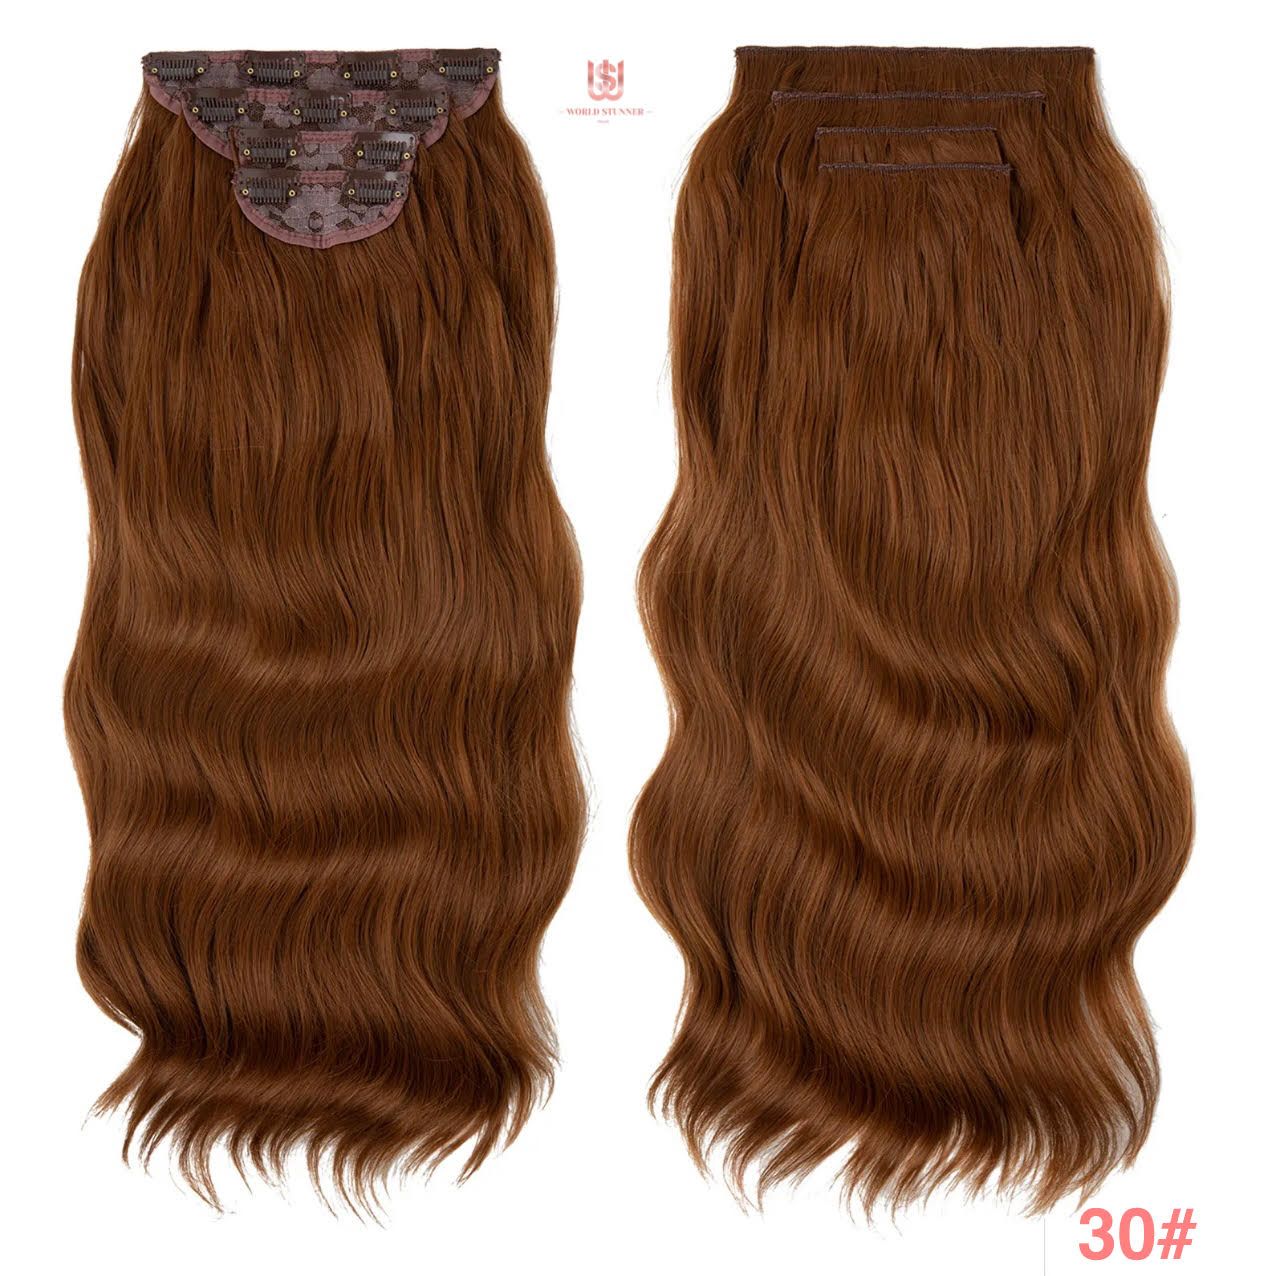 30 RED - SUPER THICK 22” 4 PIECE WAIST Length WAVE CLIPS IN HAIR Extensions